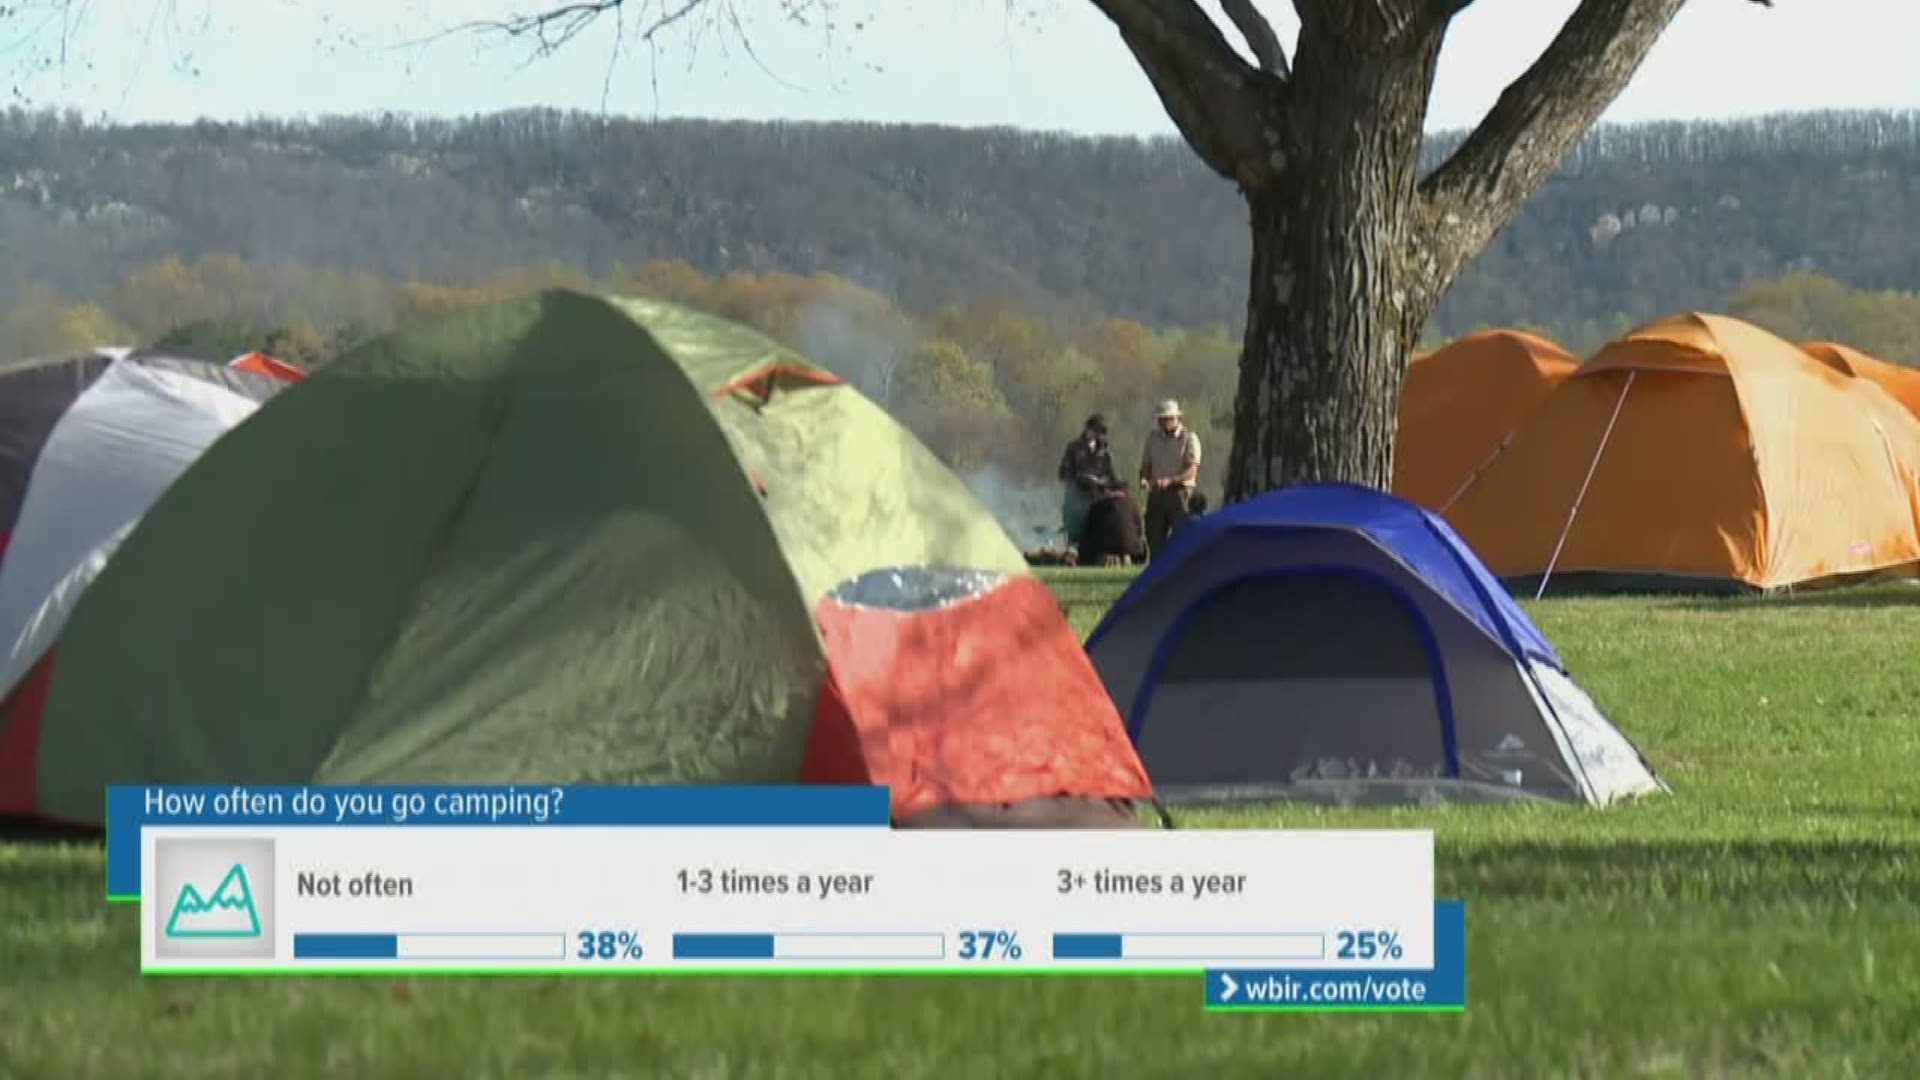 April 18, 2018: The popularity of camping is on the rise, especially among Millennials.